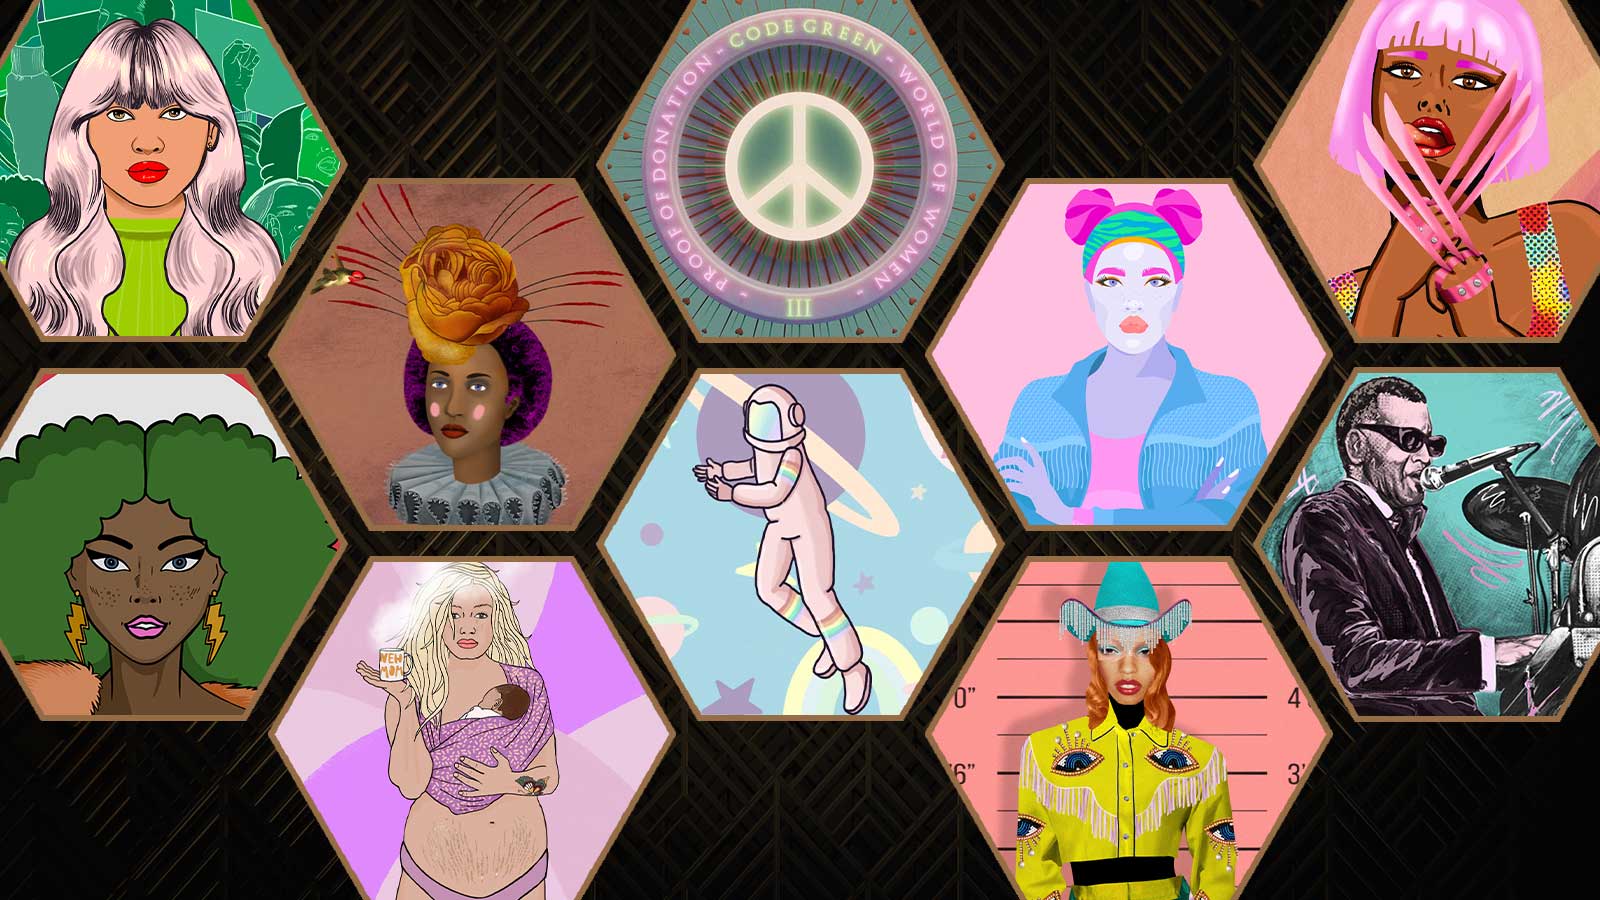 A collage of hexagon frames against a black background featuring NFTs from collections including Computer Cowgirls, HUG, and Flower Girls.